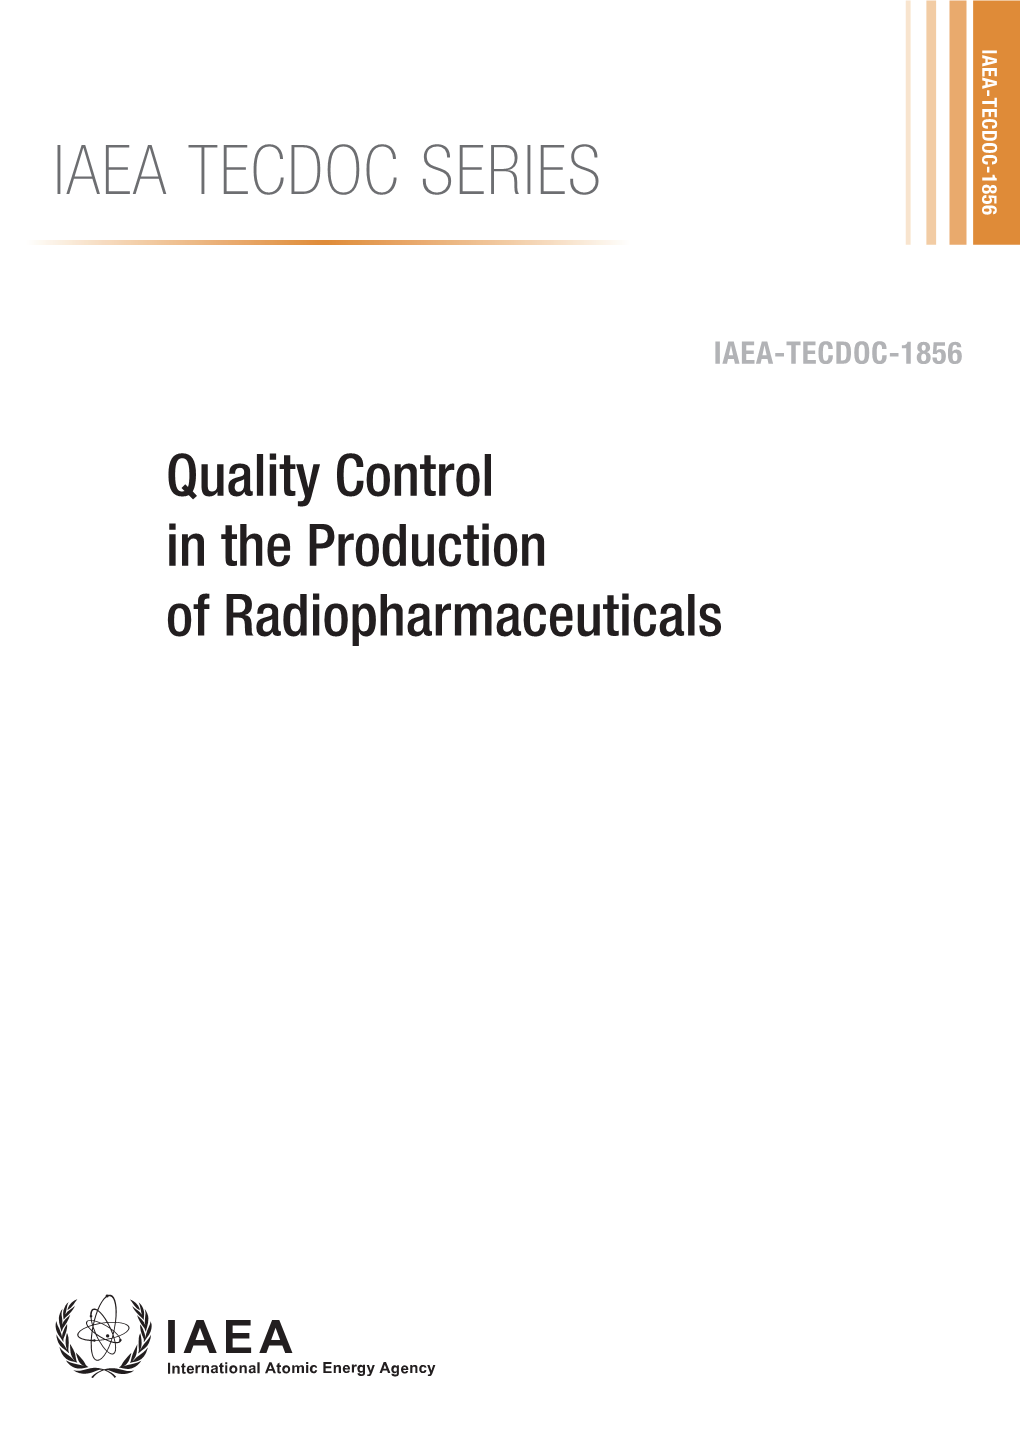 IAEA TECDOC SERIES Quality Control in the Production of Radiopharmaceuticals